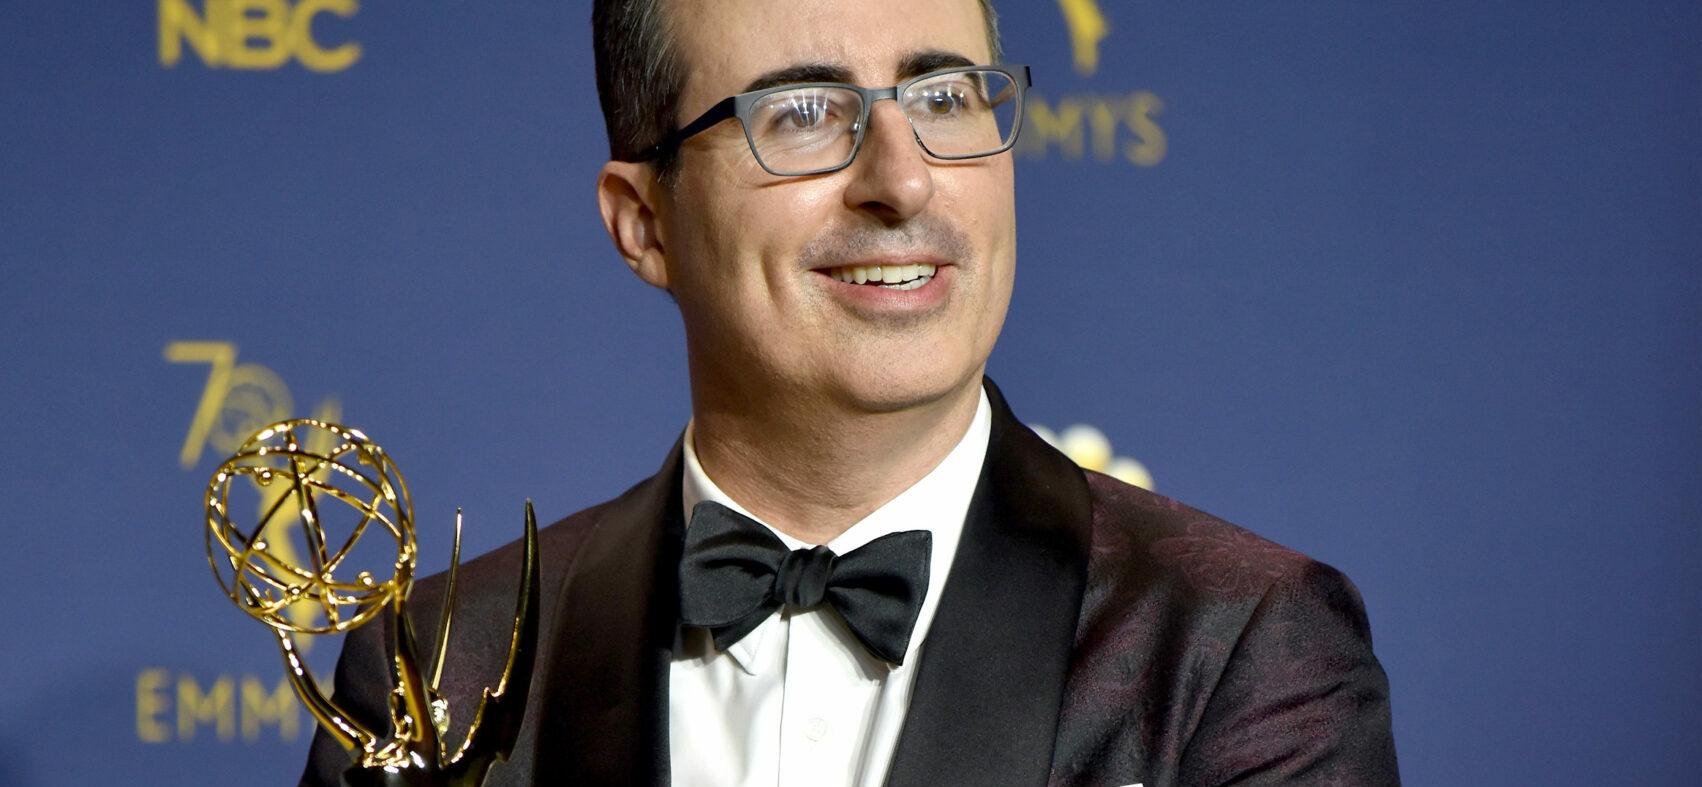 John Oliver wins award at the 70th Primetime Emmy Awards in Los Angeles